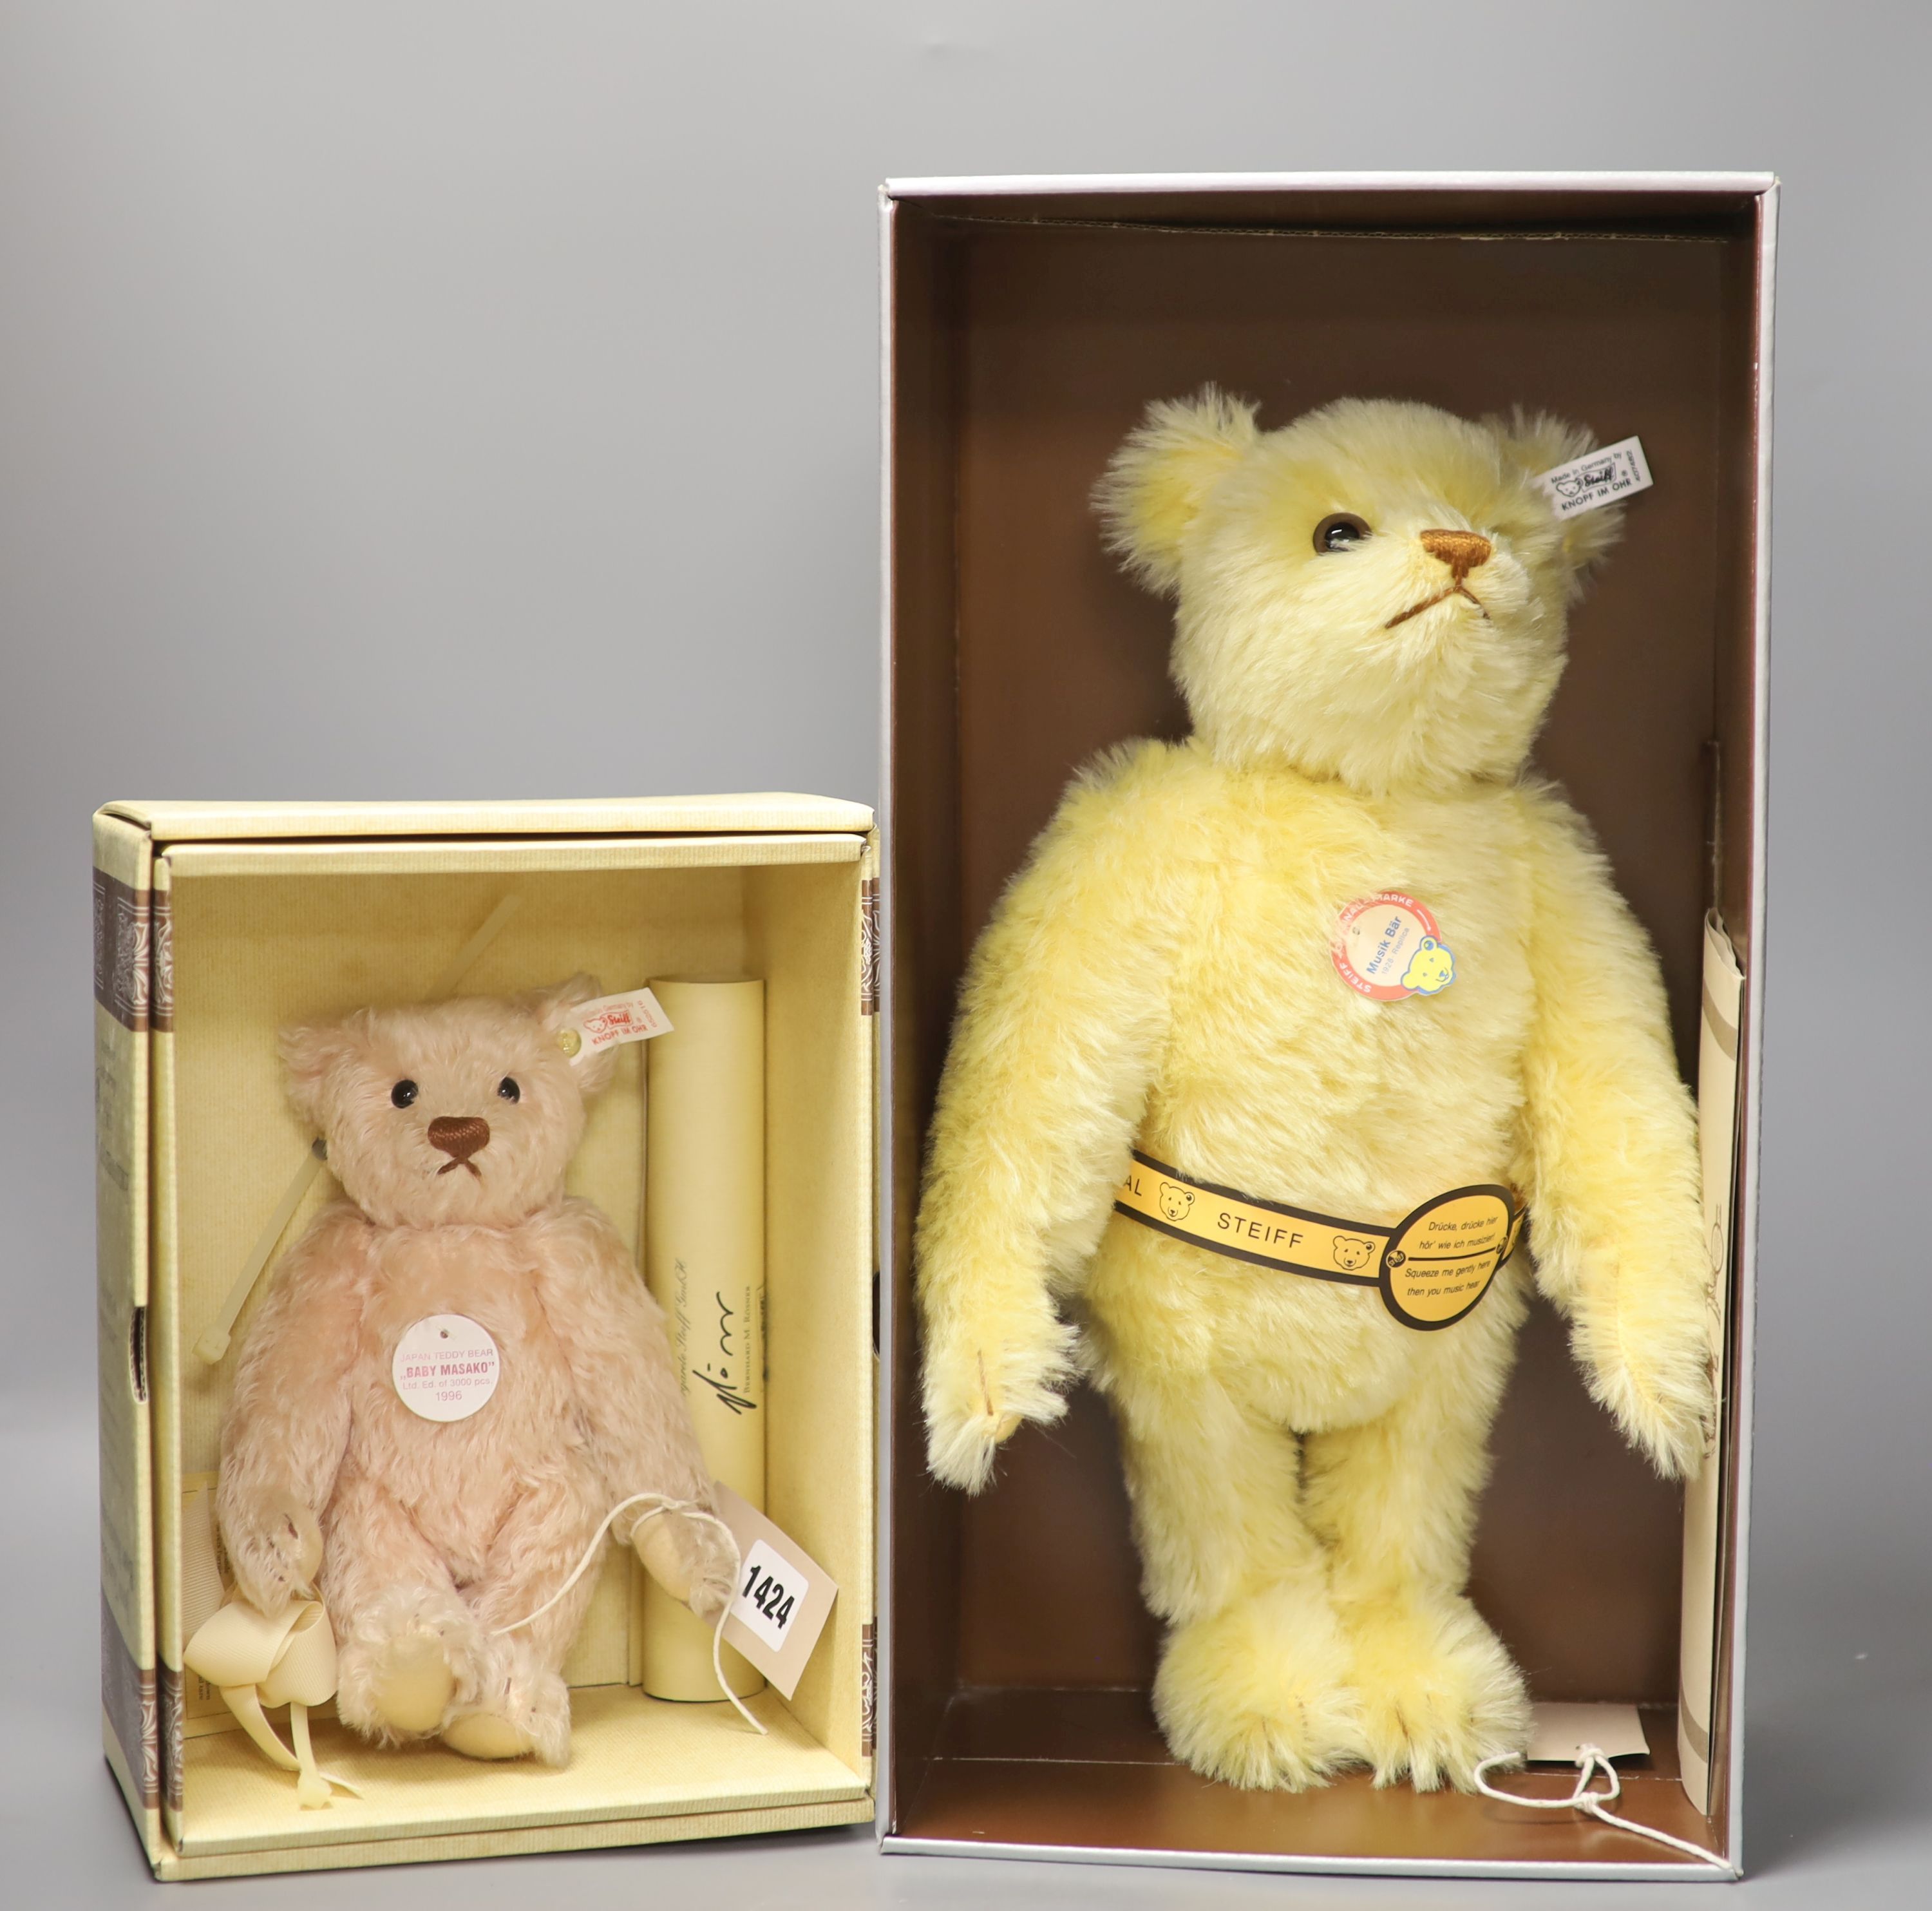 Steiff 1928 musical bear, box and certificate and Baby 'Masako' Japanese limited edition, box and certificate (2)